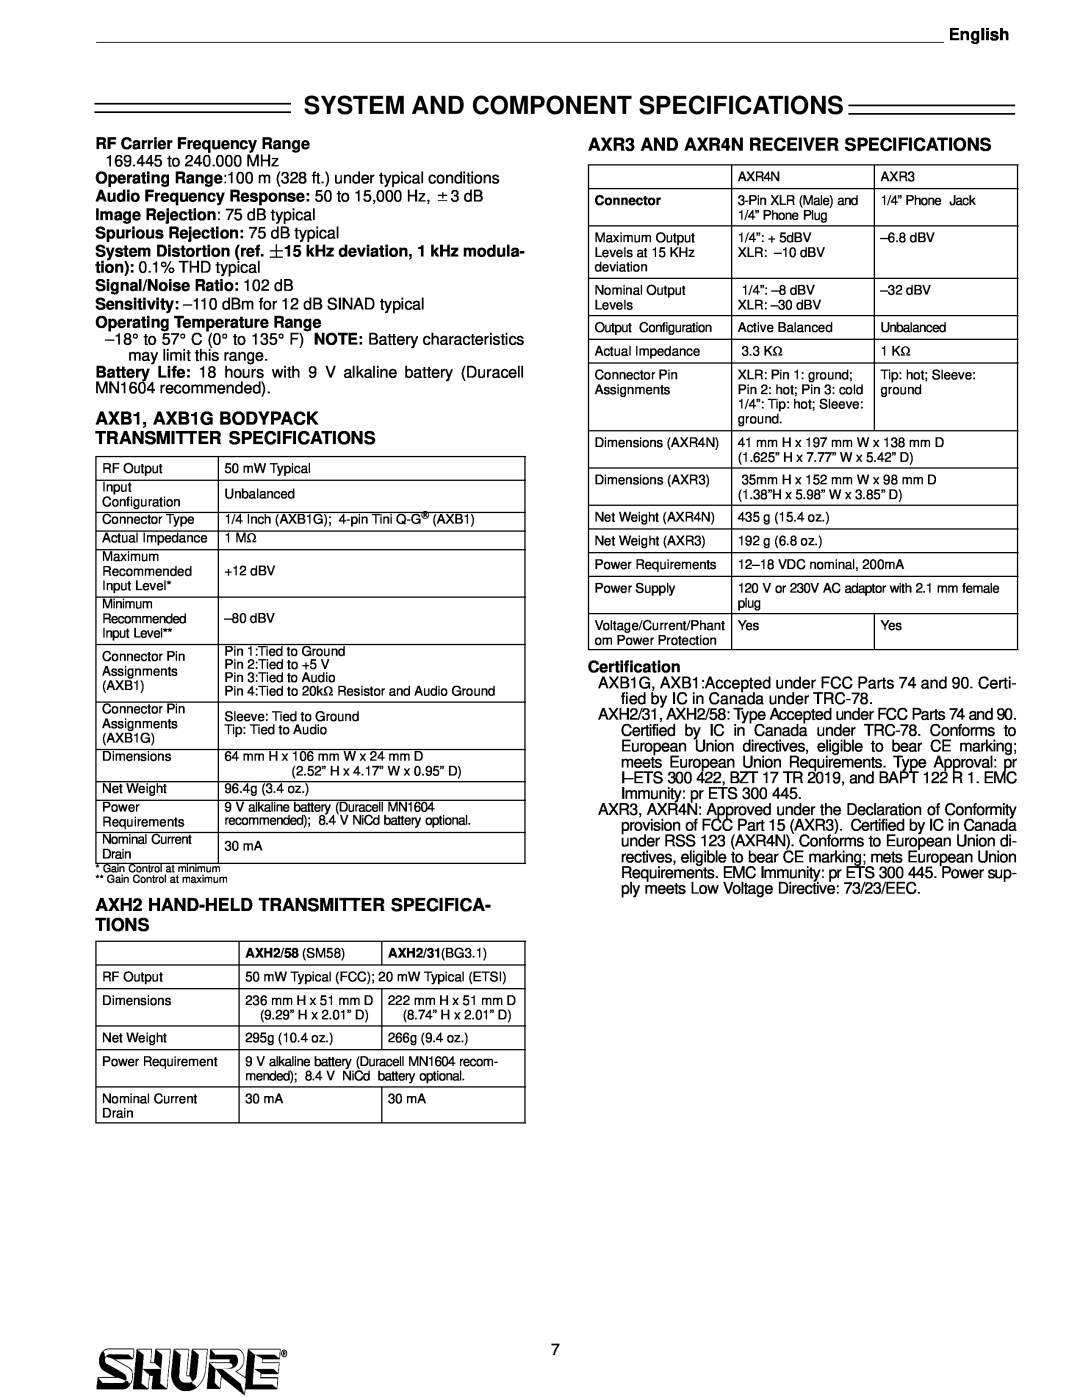 Shure AXS58 System And Component Specifications, AXB1, AXB1G BODYPACK TRANSMITTER SPECIFICATIONS, English, Certification 